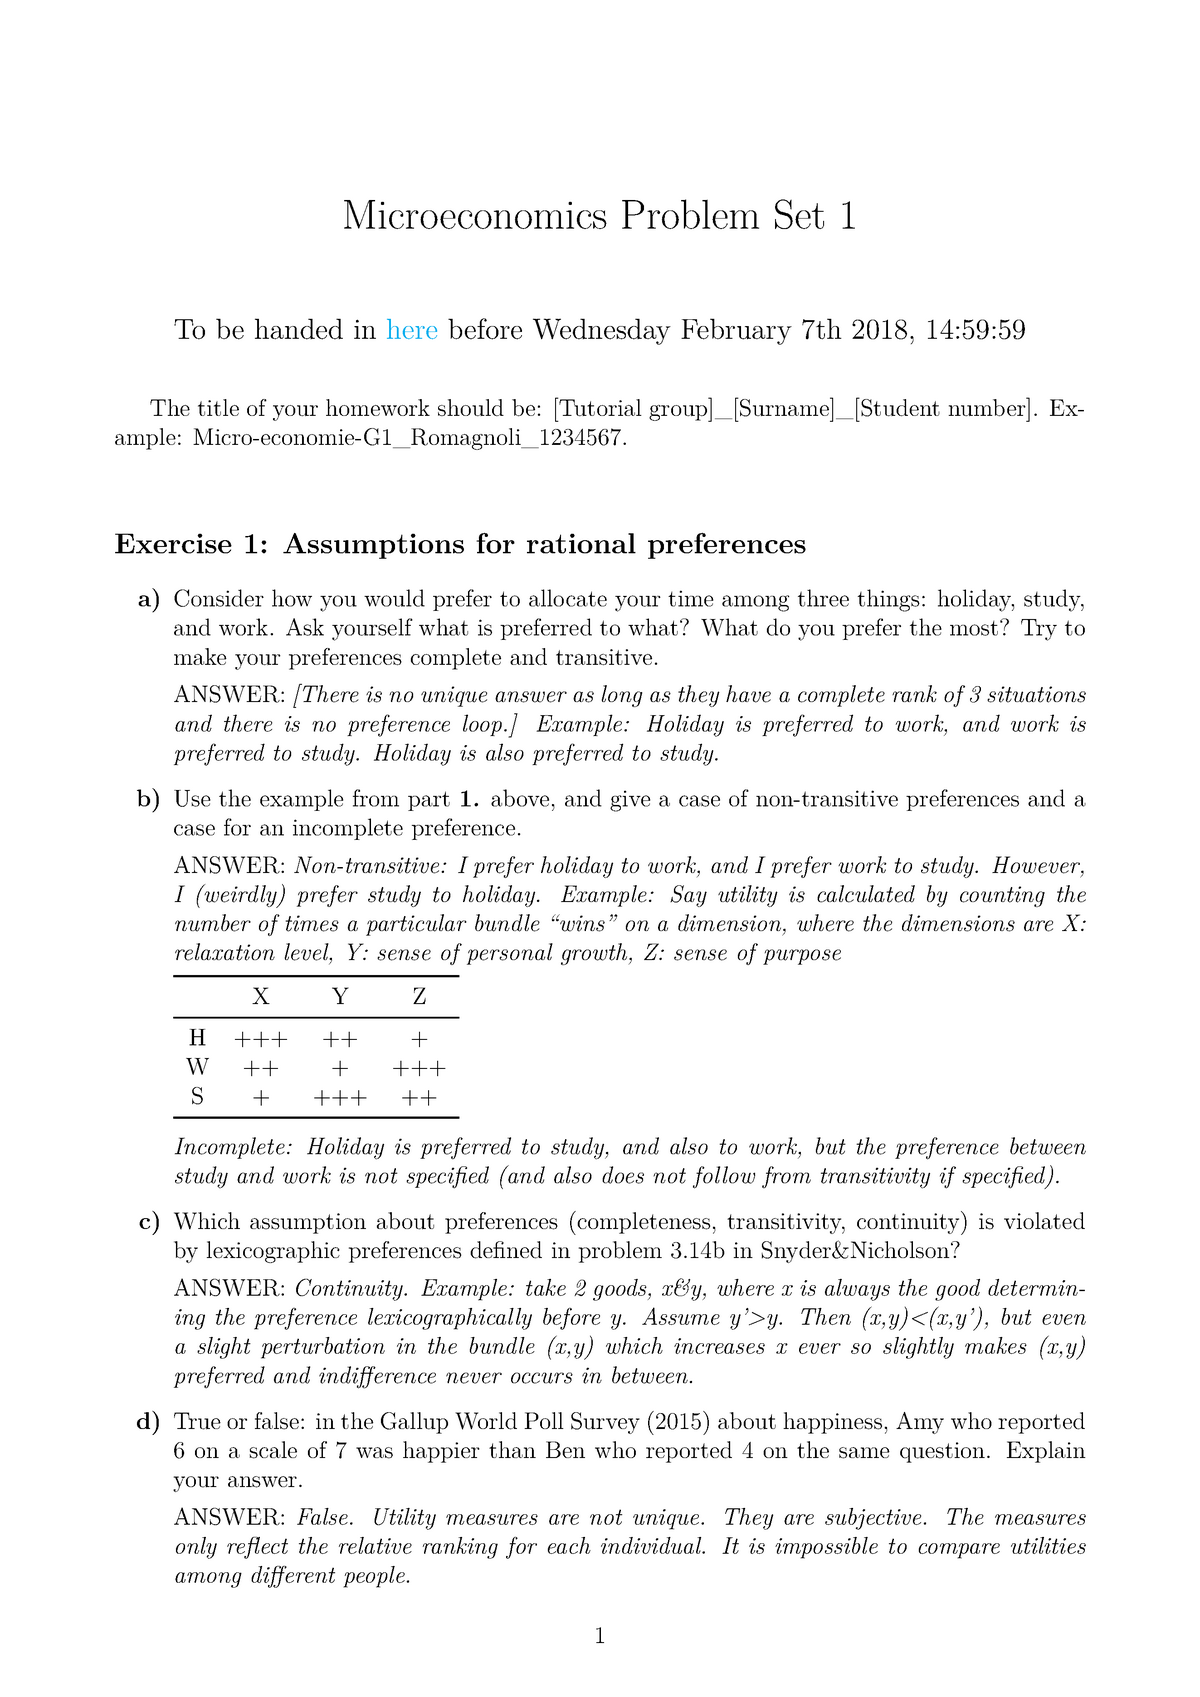 microeconomics assignment questions and answers